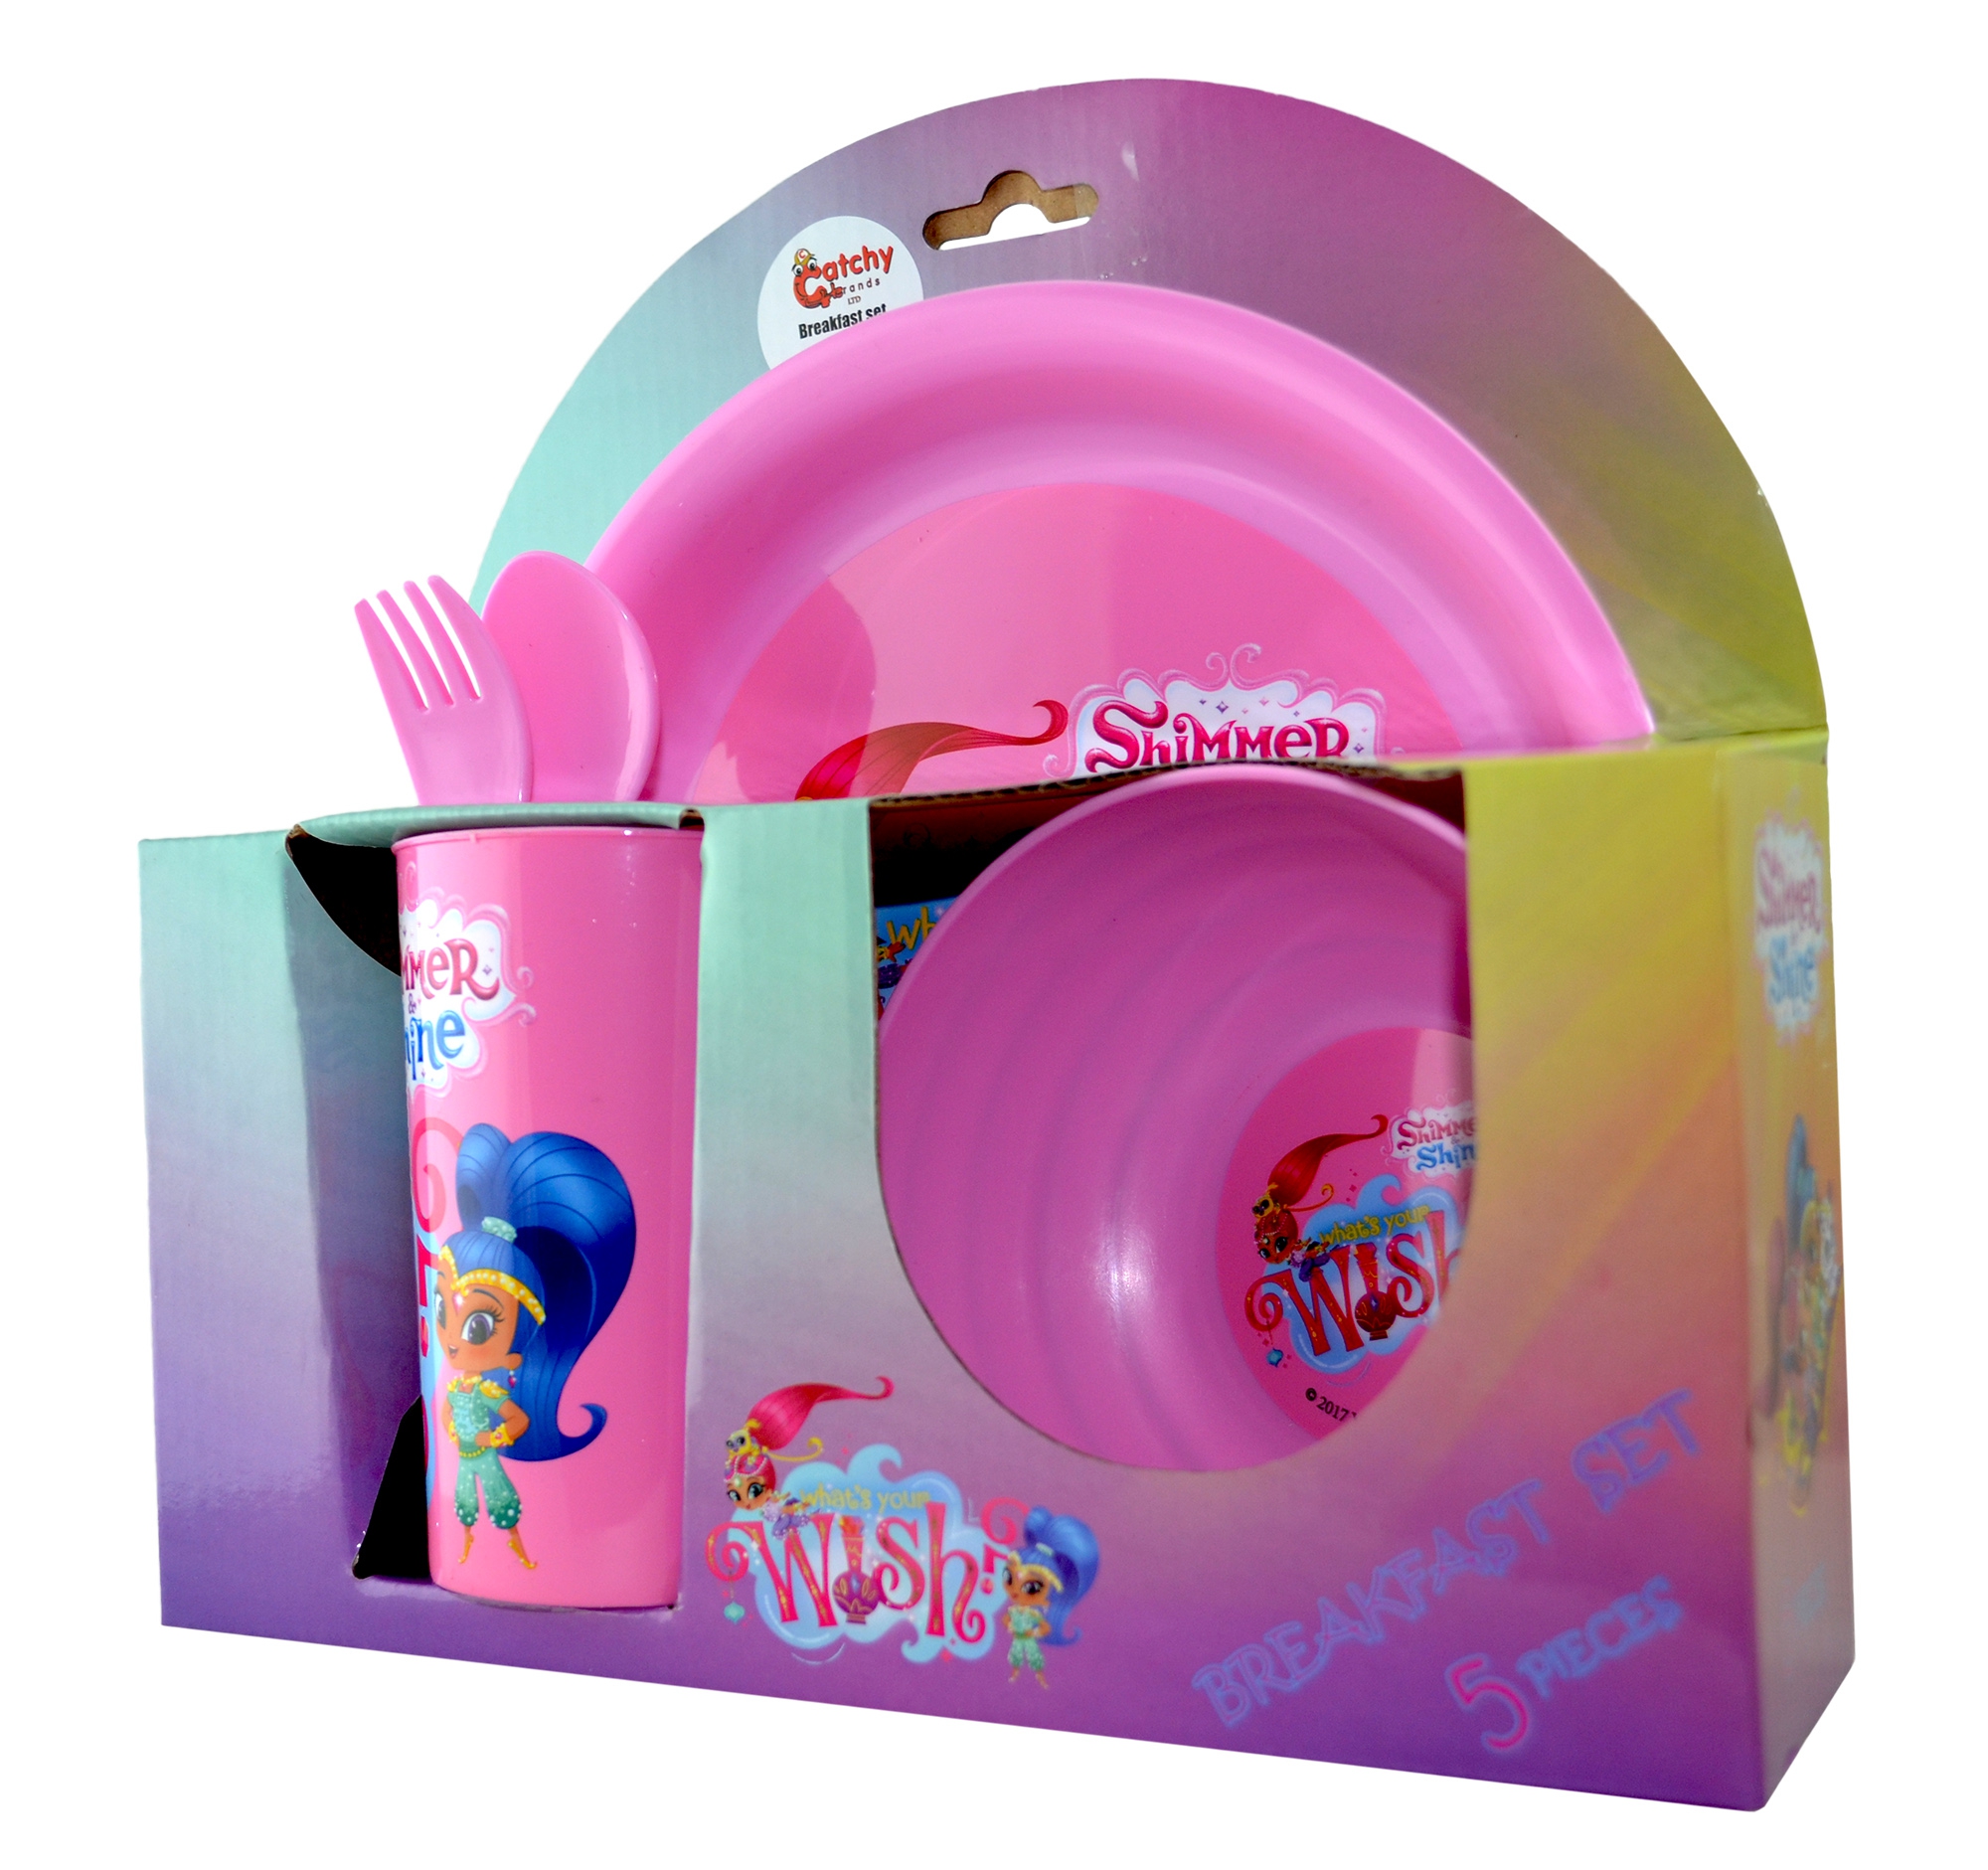 Shimmer & Shine 'What' S Your Wish' 5 Piece Breakfast Dinner Set